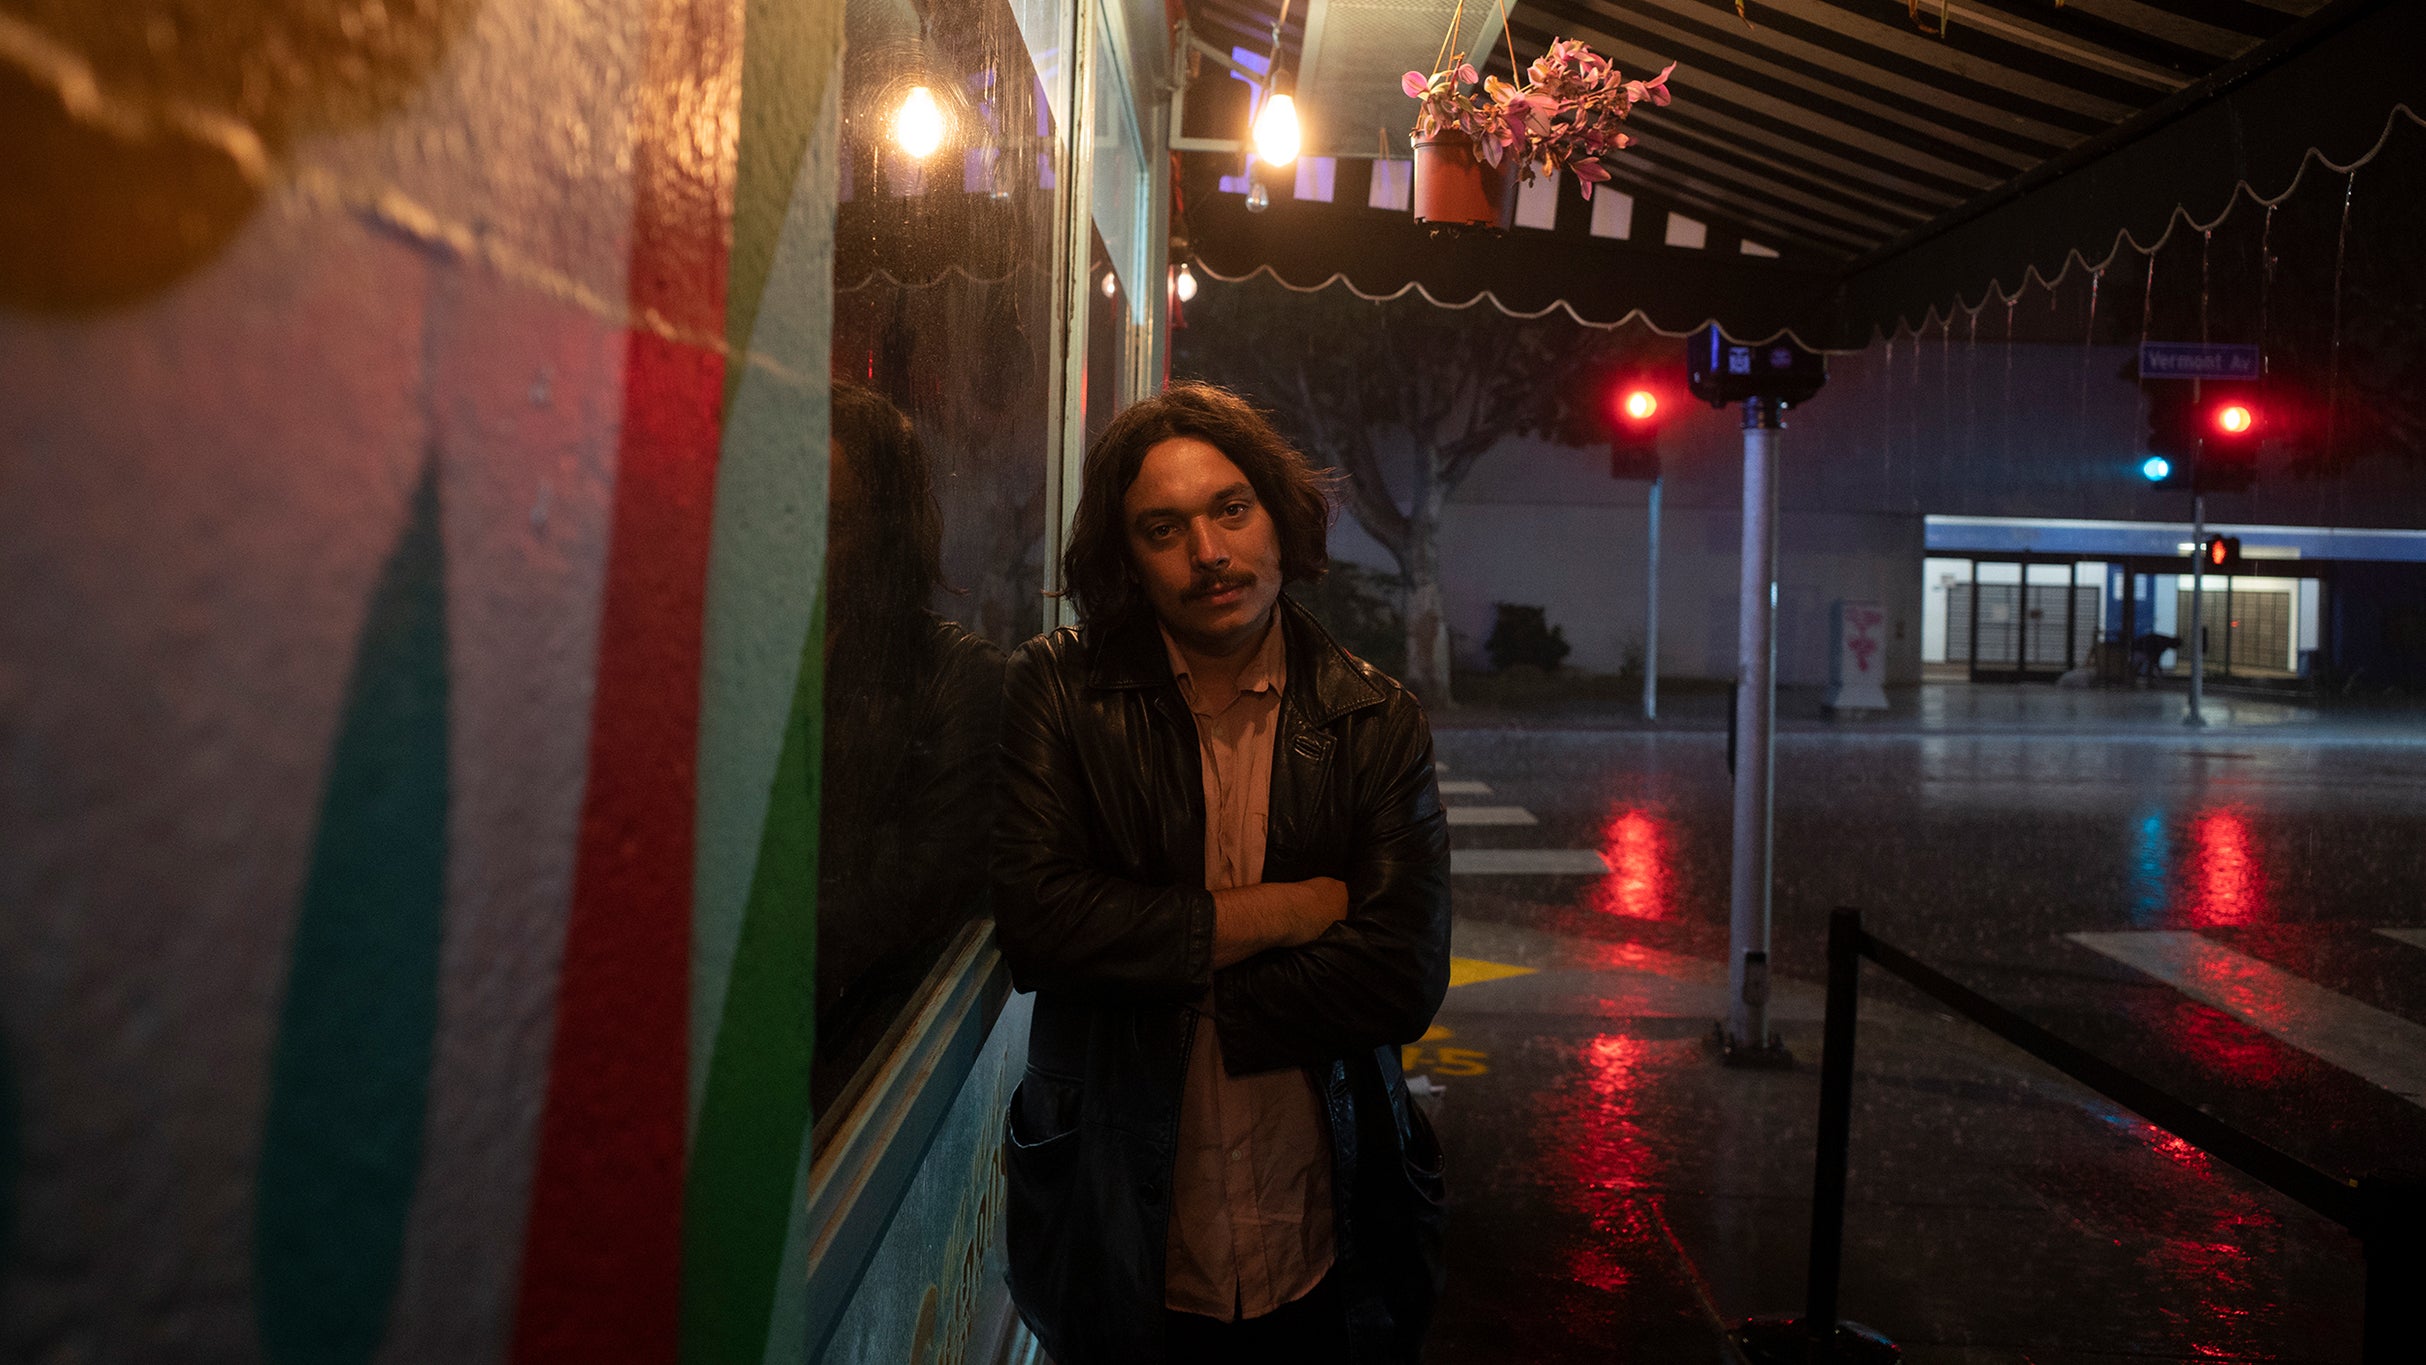 Drugdealer pre-sale password for event tickets in Boston, MA (Brighton Music Hall presented by Citizens)